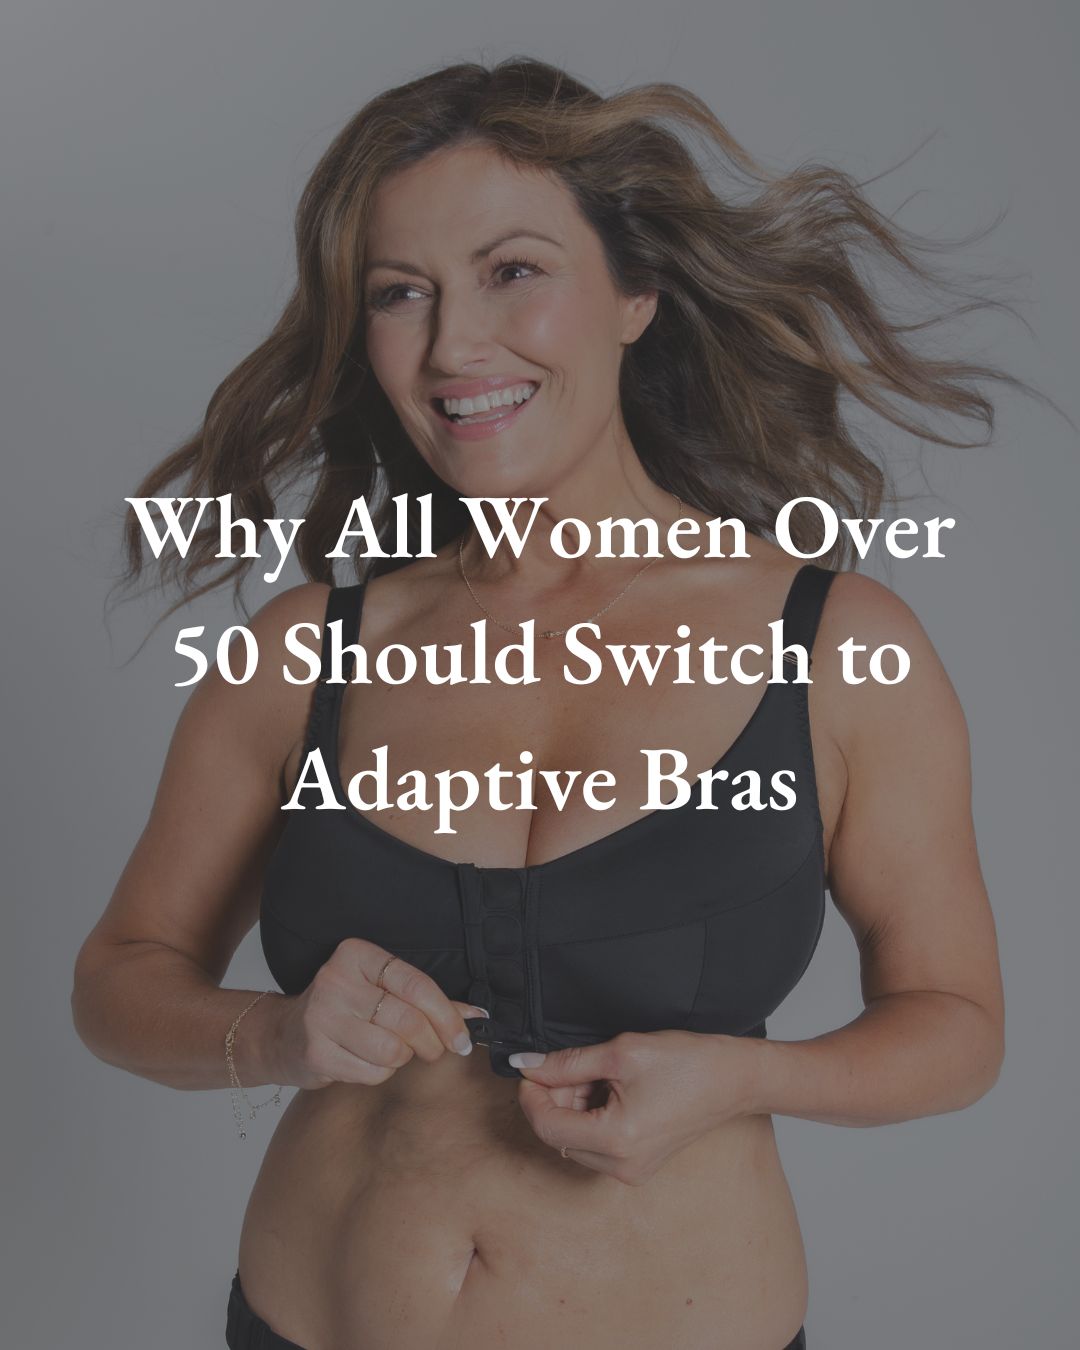 How to Find The Best Adaptive Bra (2023) – Liberare